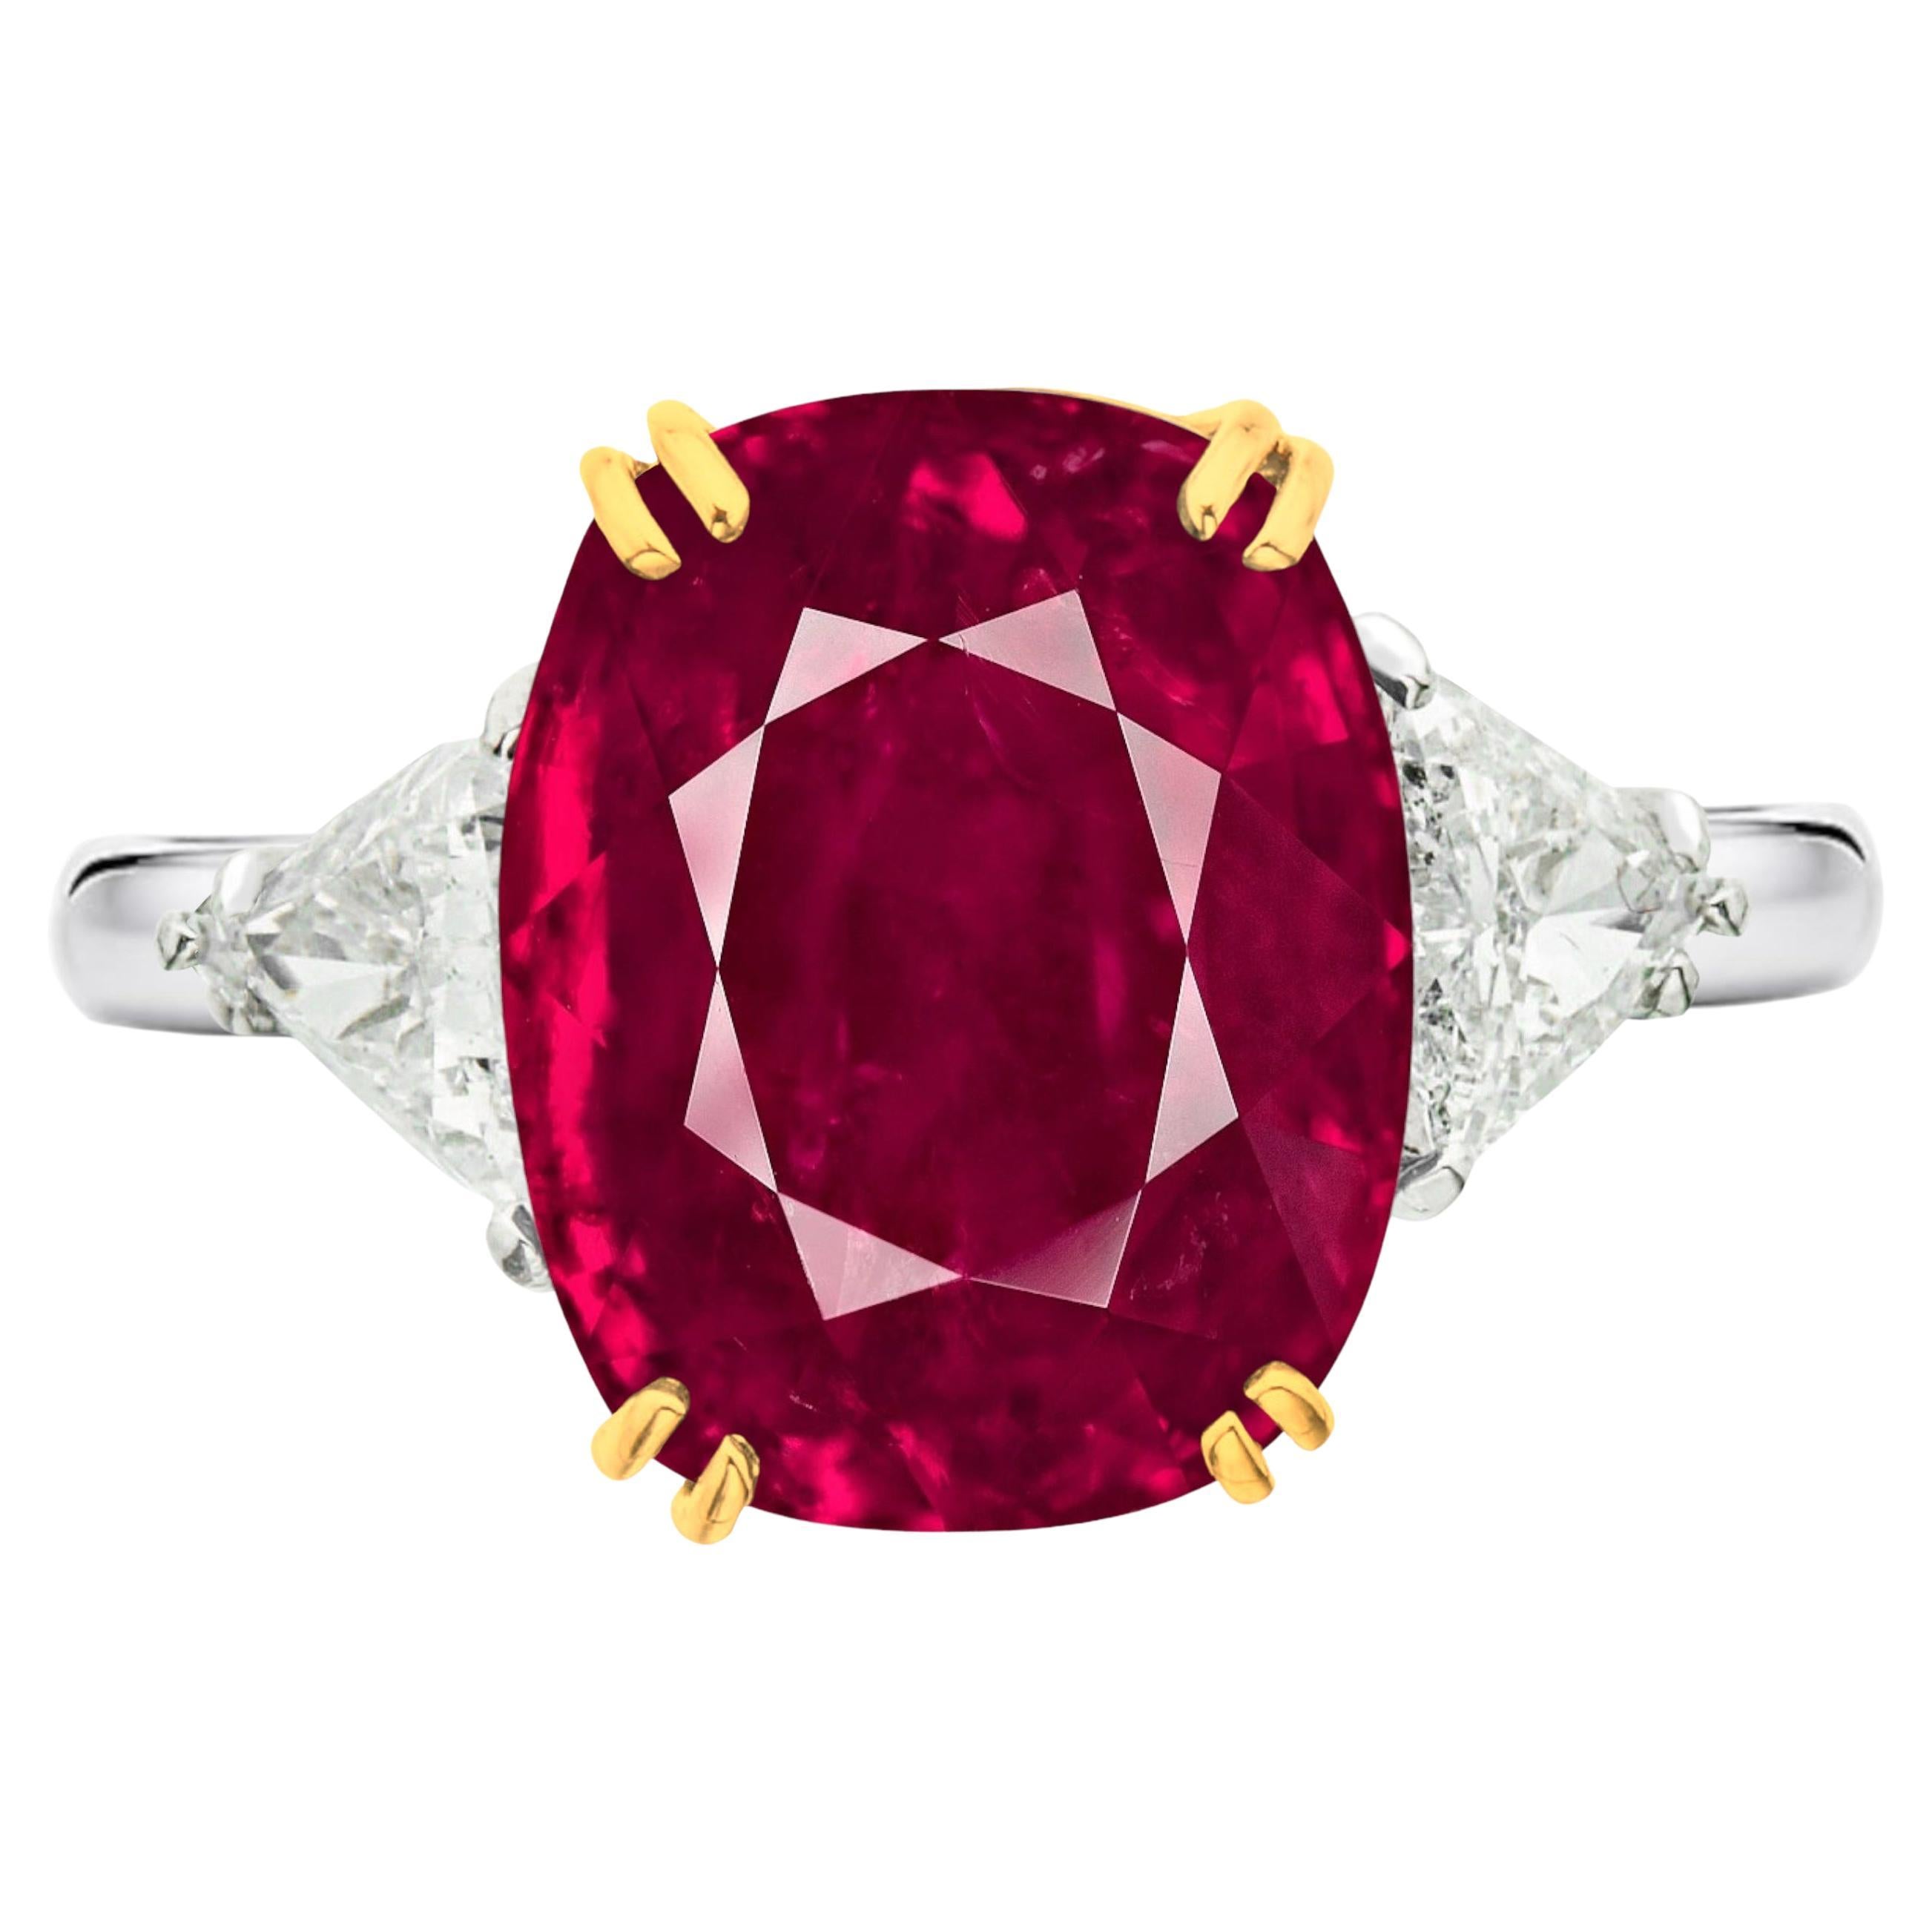 GIA Certified 5 Carat Unheated/Untreated Ruby from Mozambique For Sale